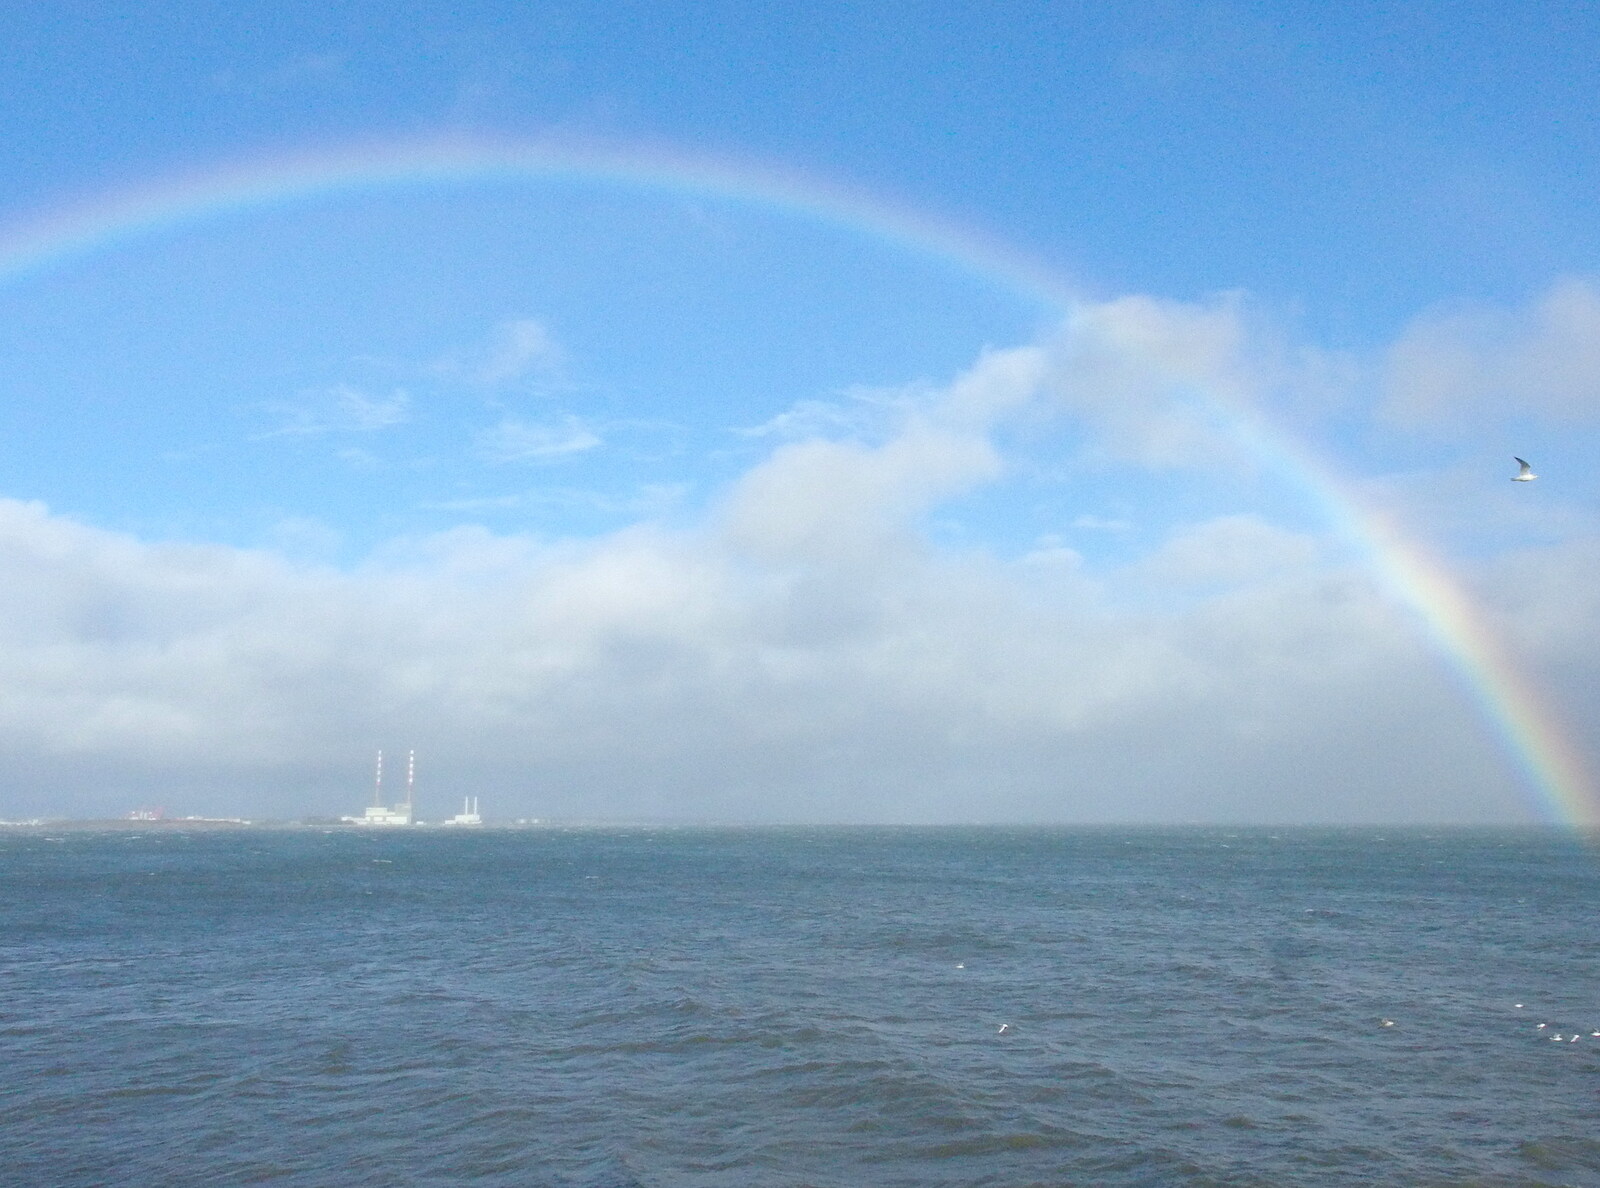 There's a rainbow over Dublin Bay from Dun Laoghaire and an Electrical Disaster, Monkstown, County Dublin, Ireland - 4th January 2014